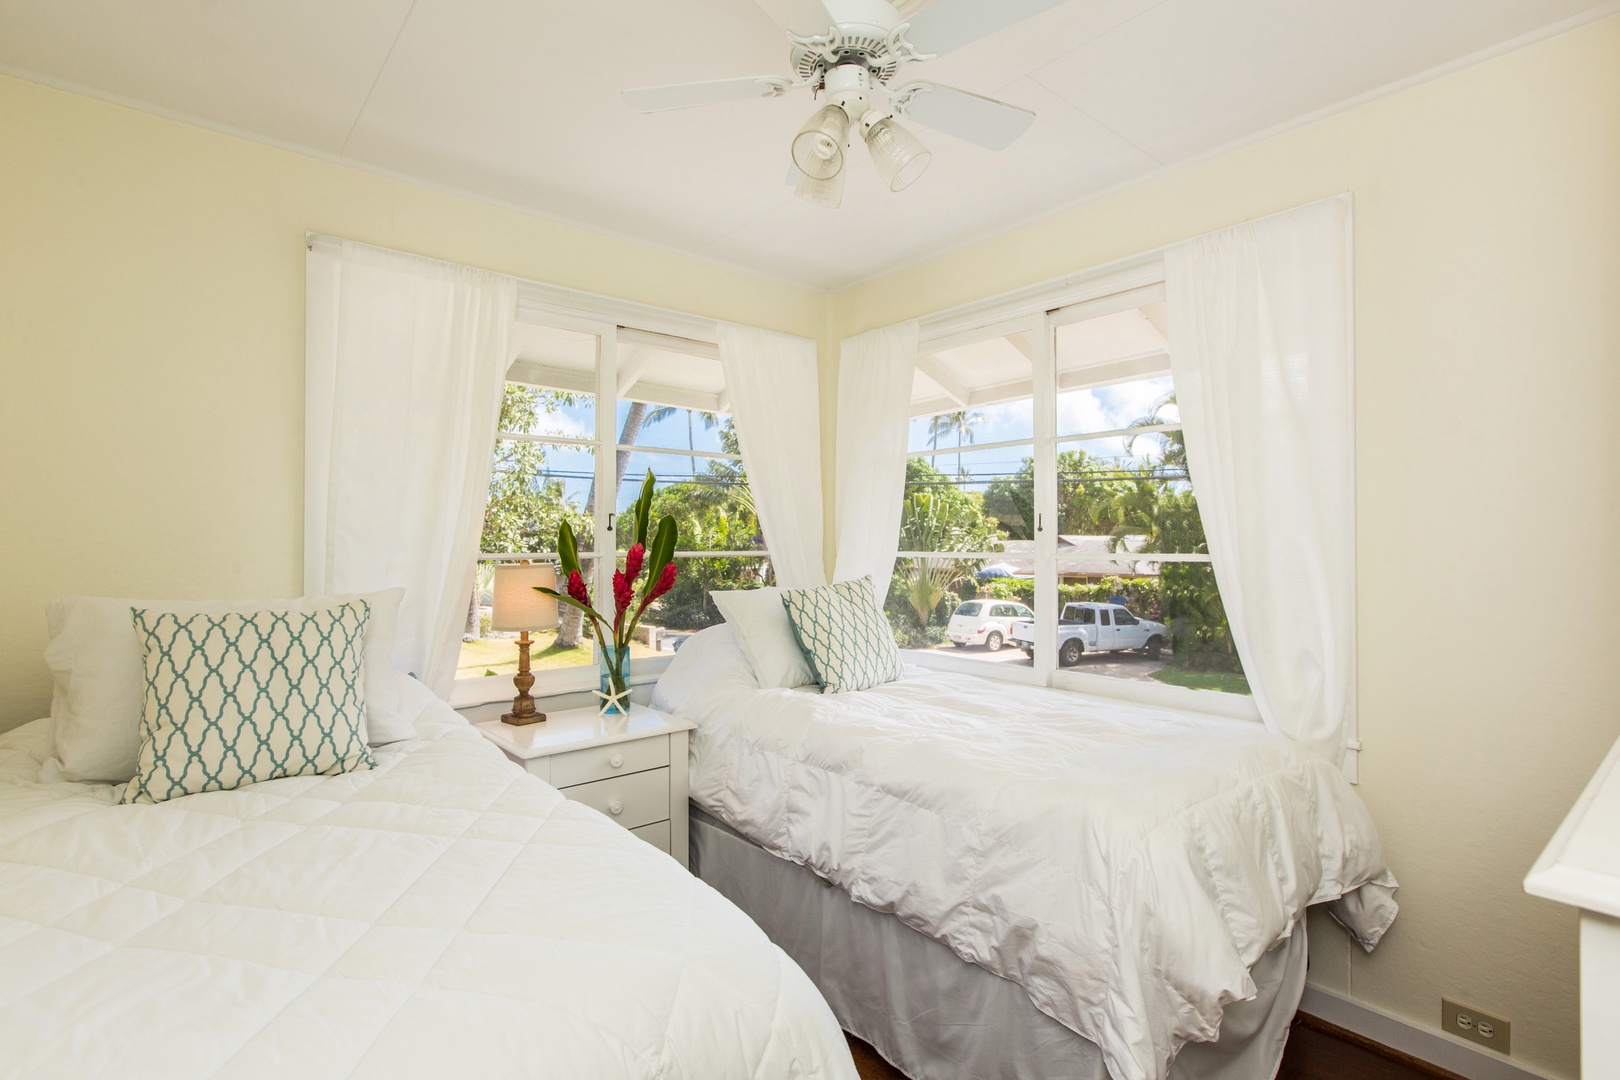 Kailua Vacation Rentals, Lanikai Cottage - Main house bedroom two, with twin beds (convertible to a king upon request) and new split air conditioning system.